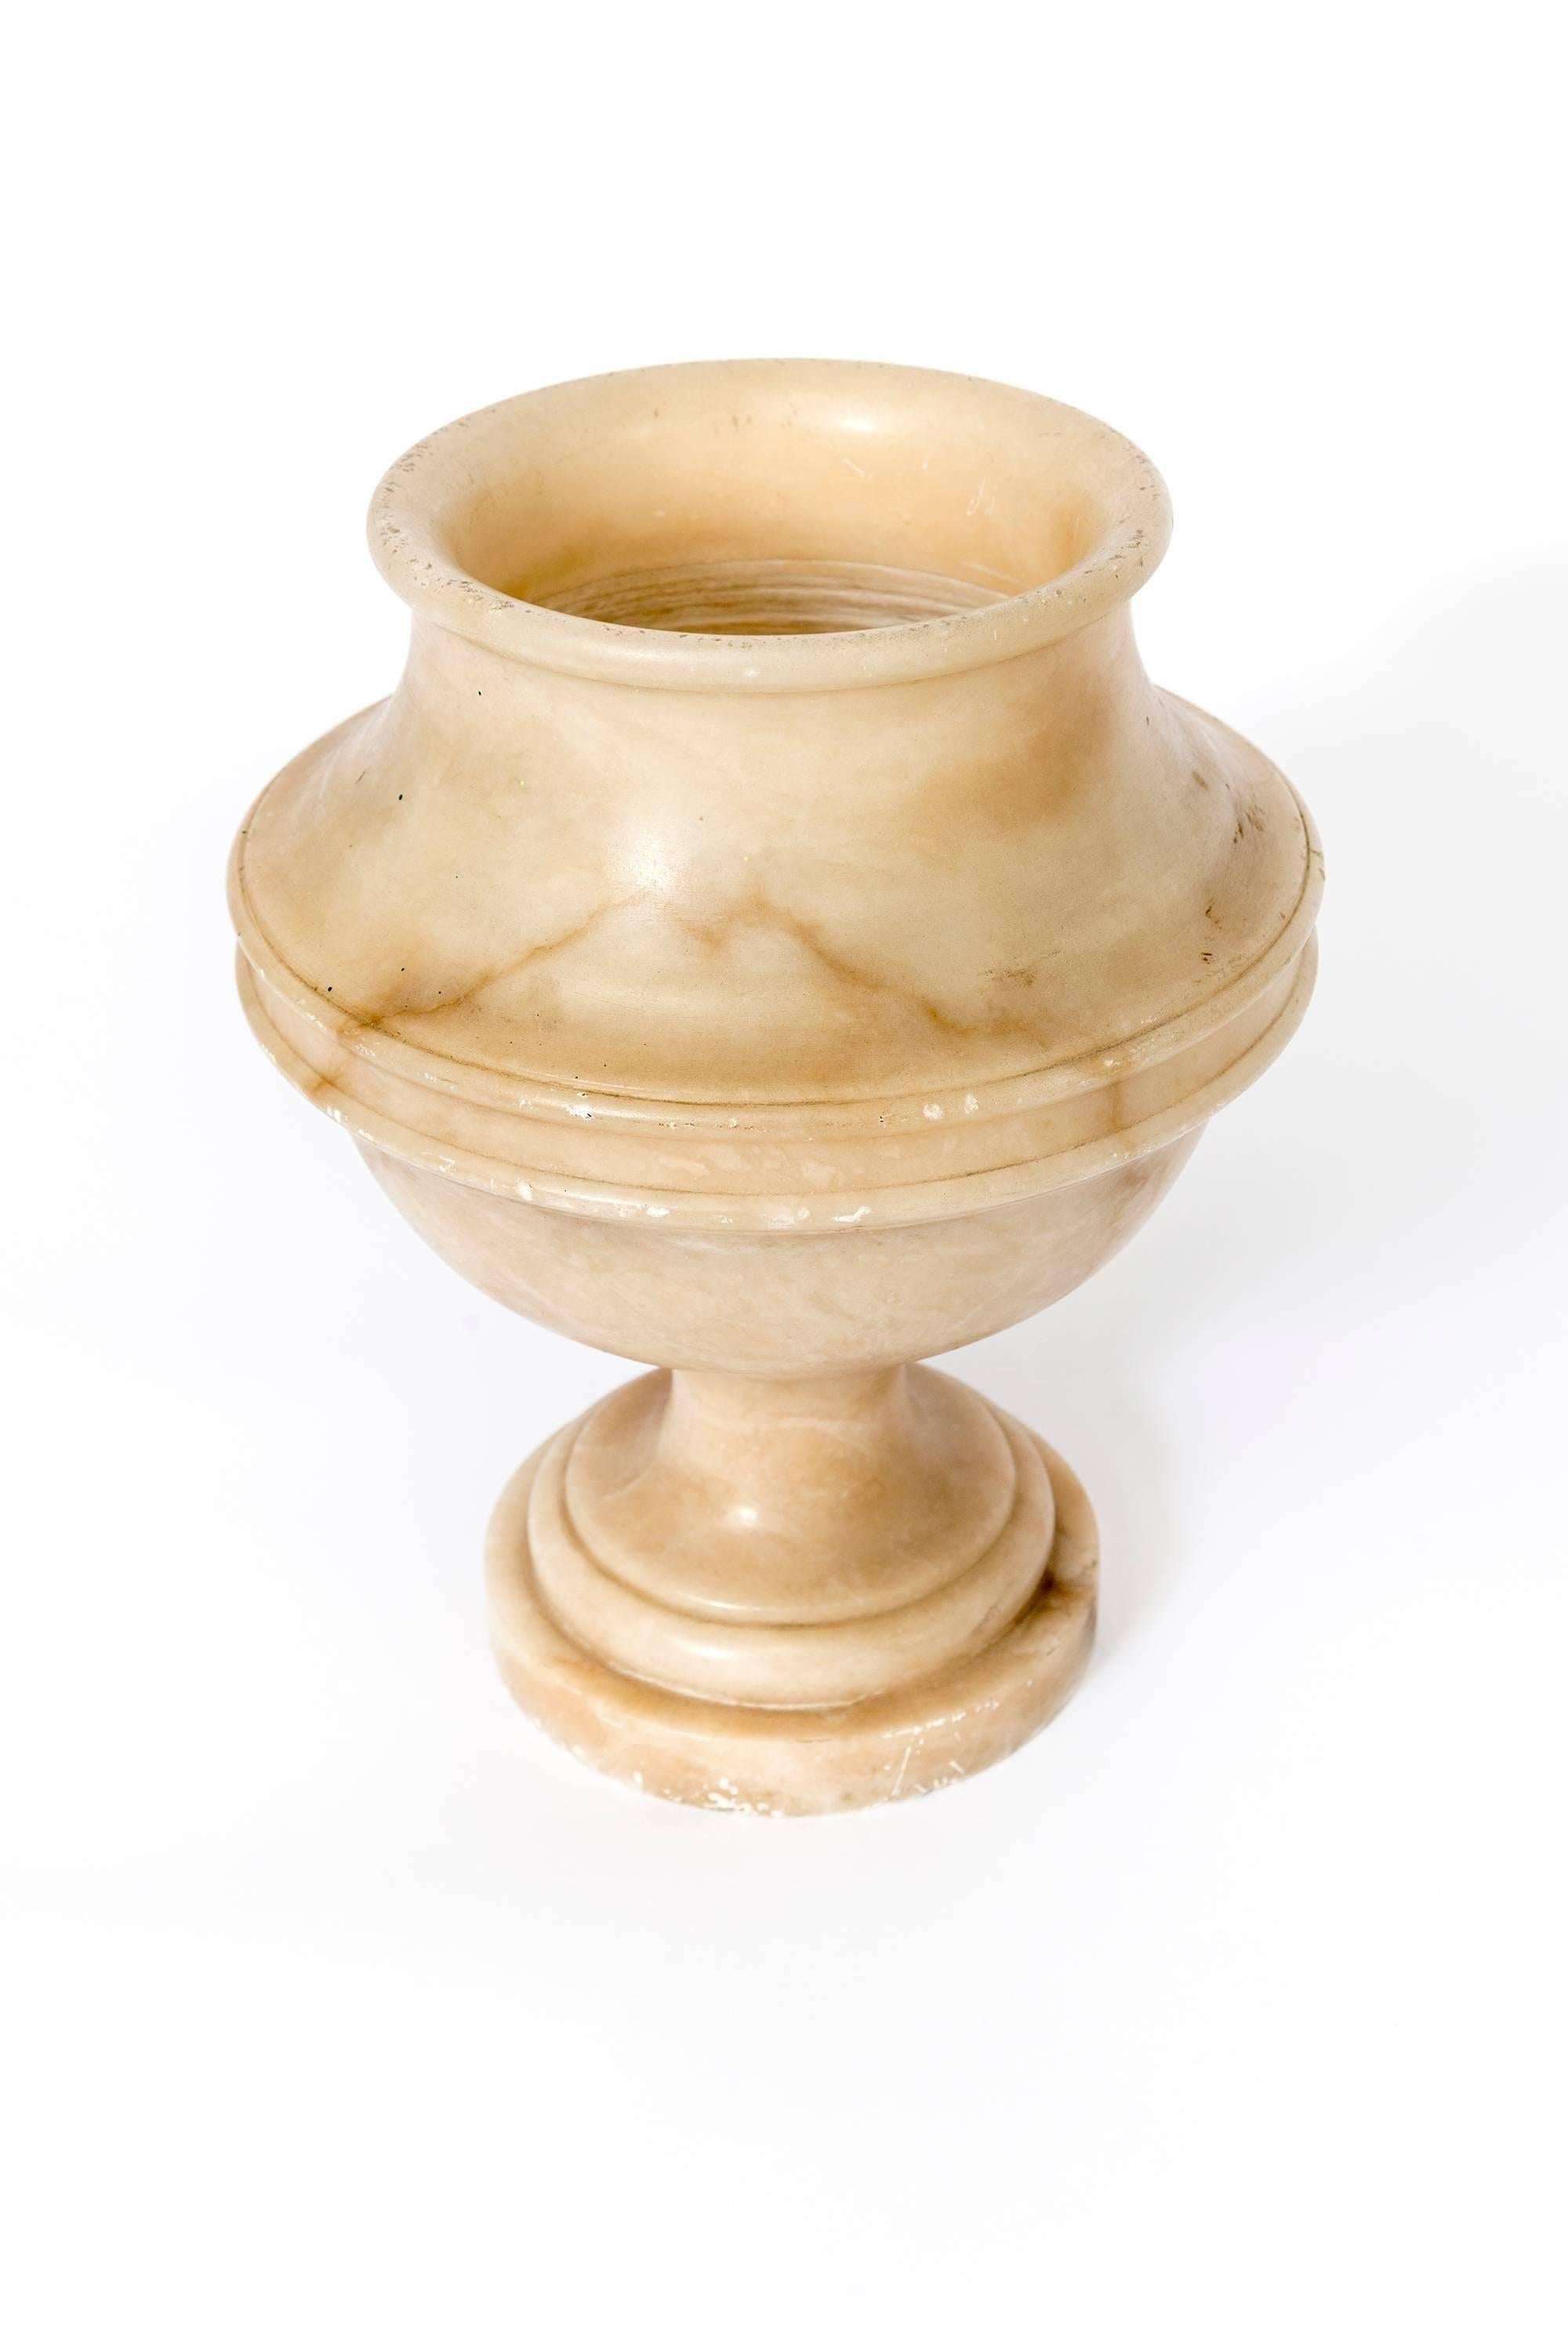 A French Alabaster vase or urn from the 19th Century.
Centre dimension 12 inch diameter
Base dimension 7 inch diameter.